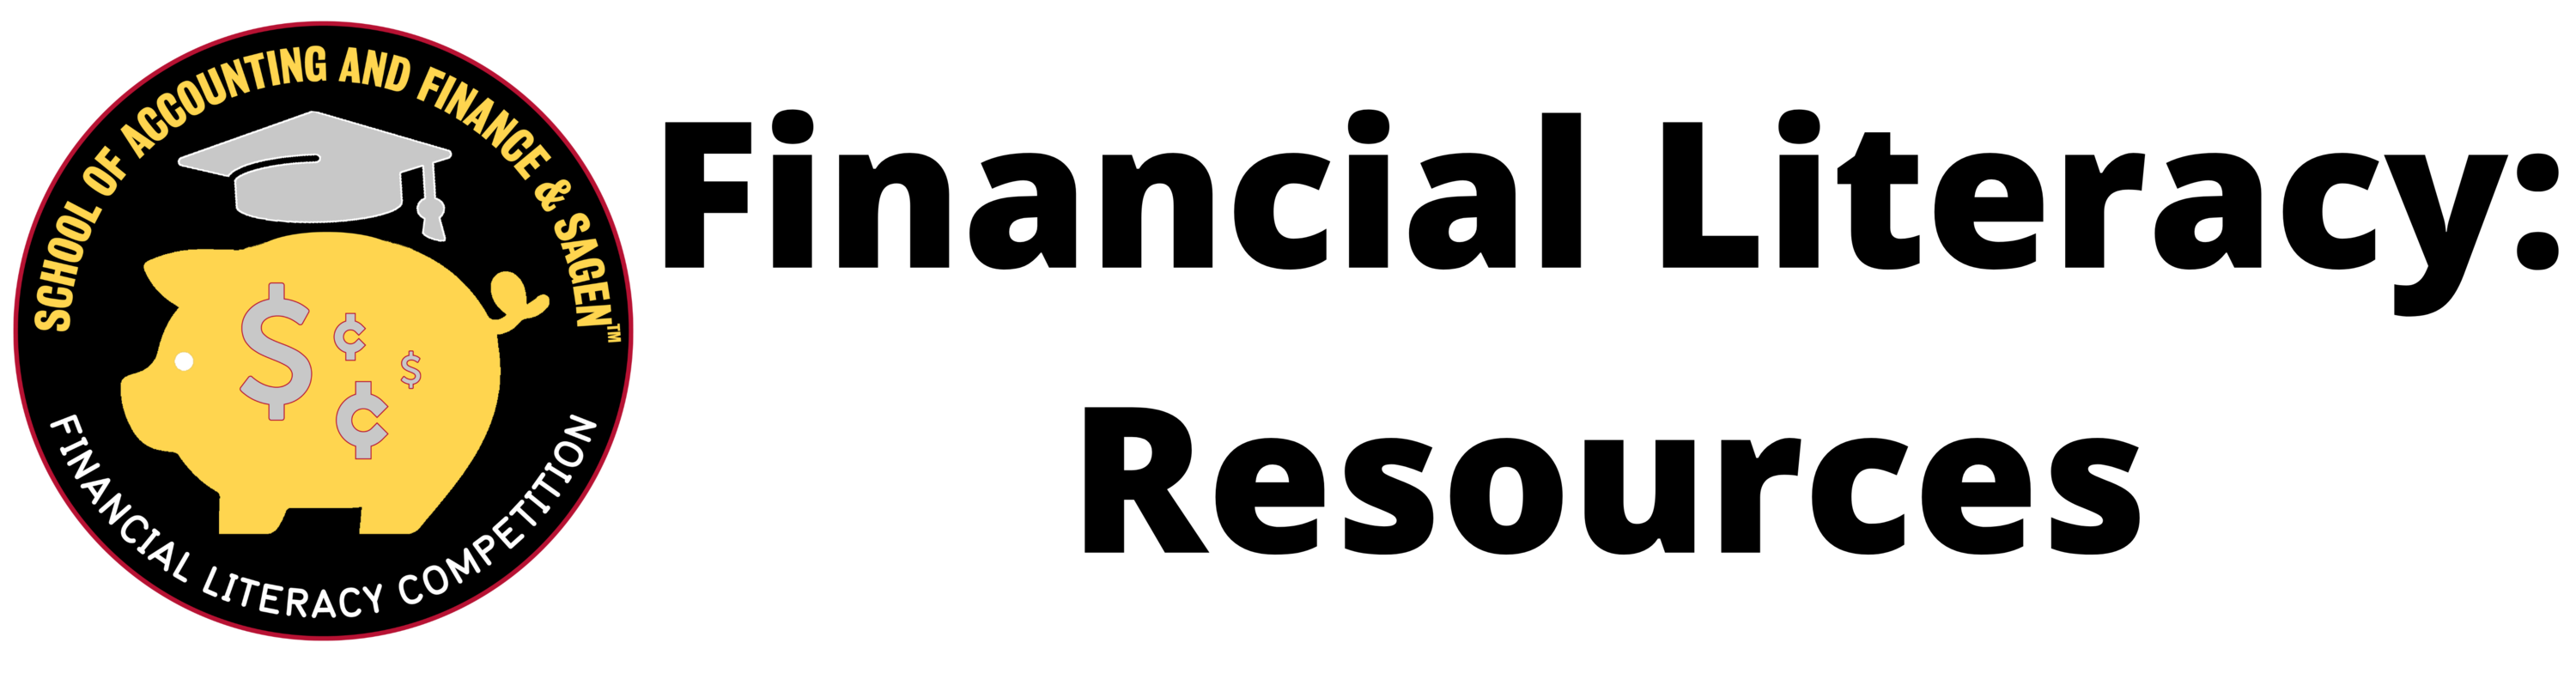 Piggy bank logo with text reading "School of Accounting and Finance Financial Literacy Competition" and large banner reading "Financial Literacy Resources"